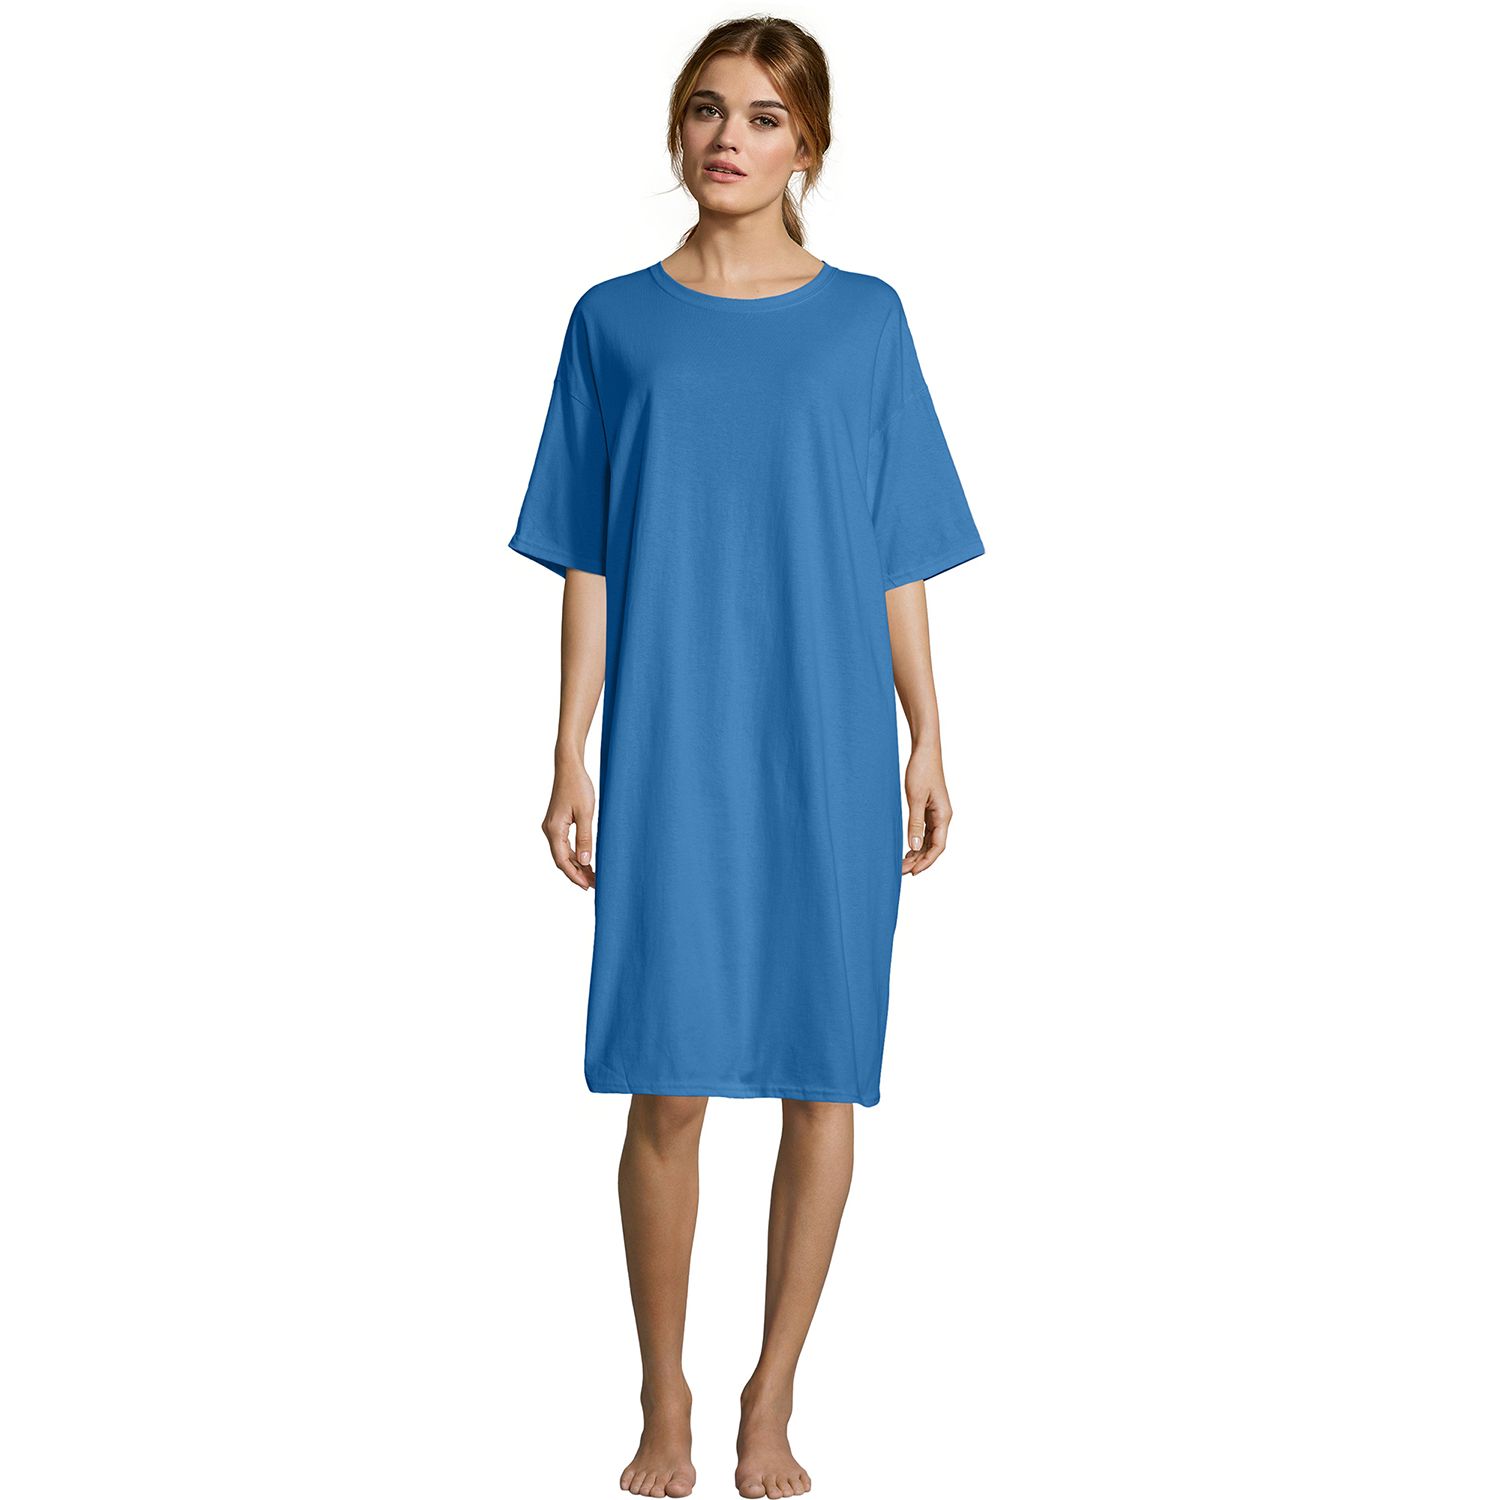 Image for Hanes Women's Wear-Around Lounge Shirt at Kohl's.